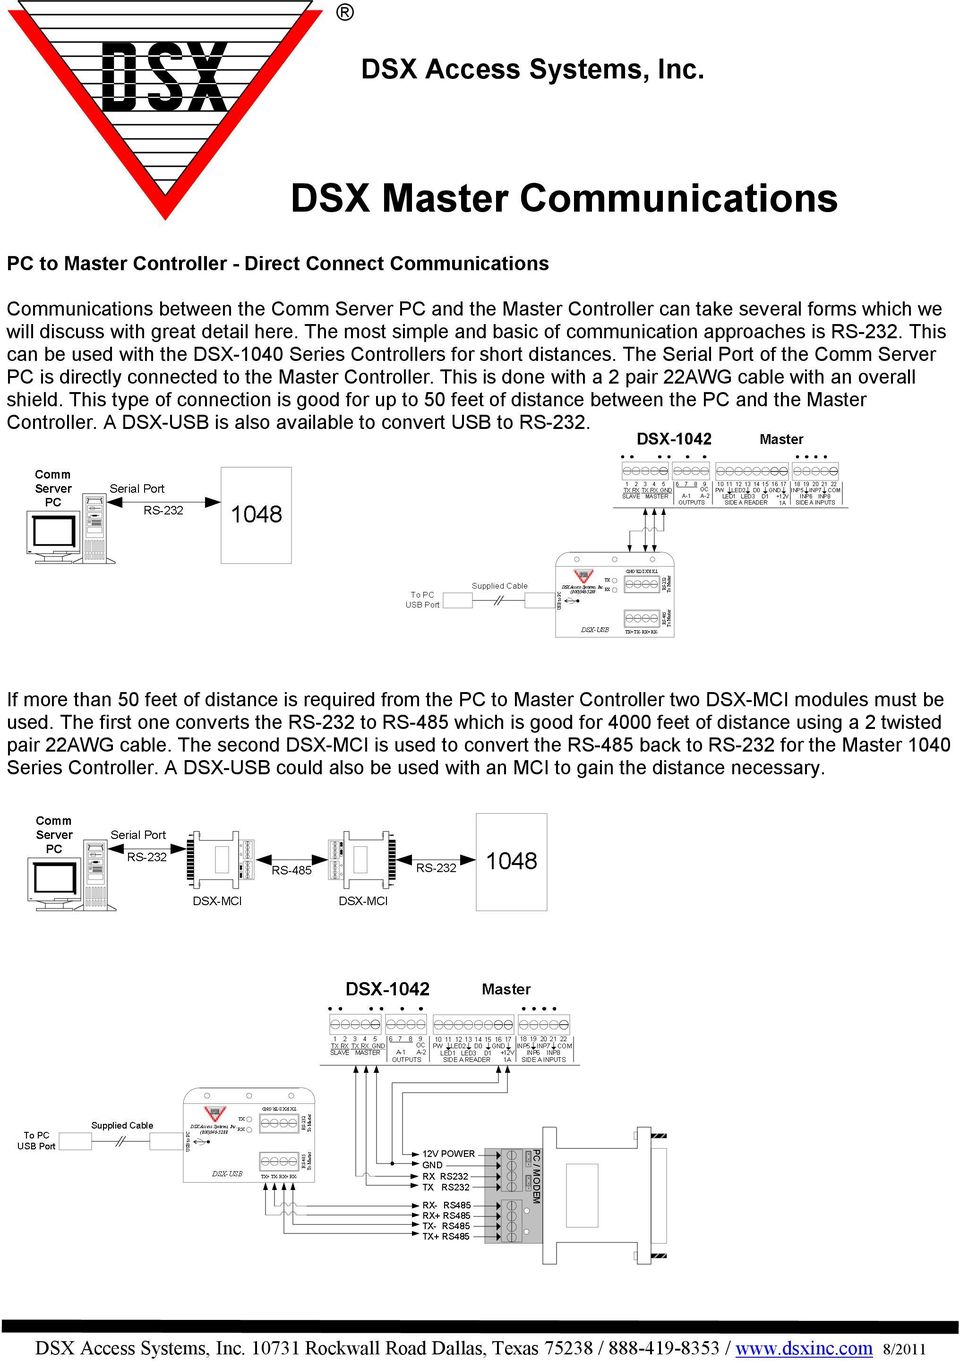 great detail here. The most simple and basic of communication approaches is RS-232. This can be used with the DSX-1040 Series Controllers for short distances.